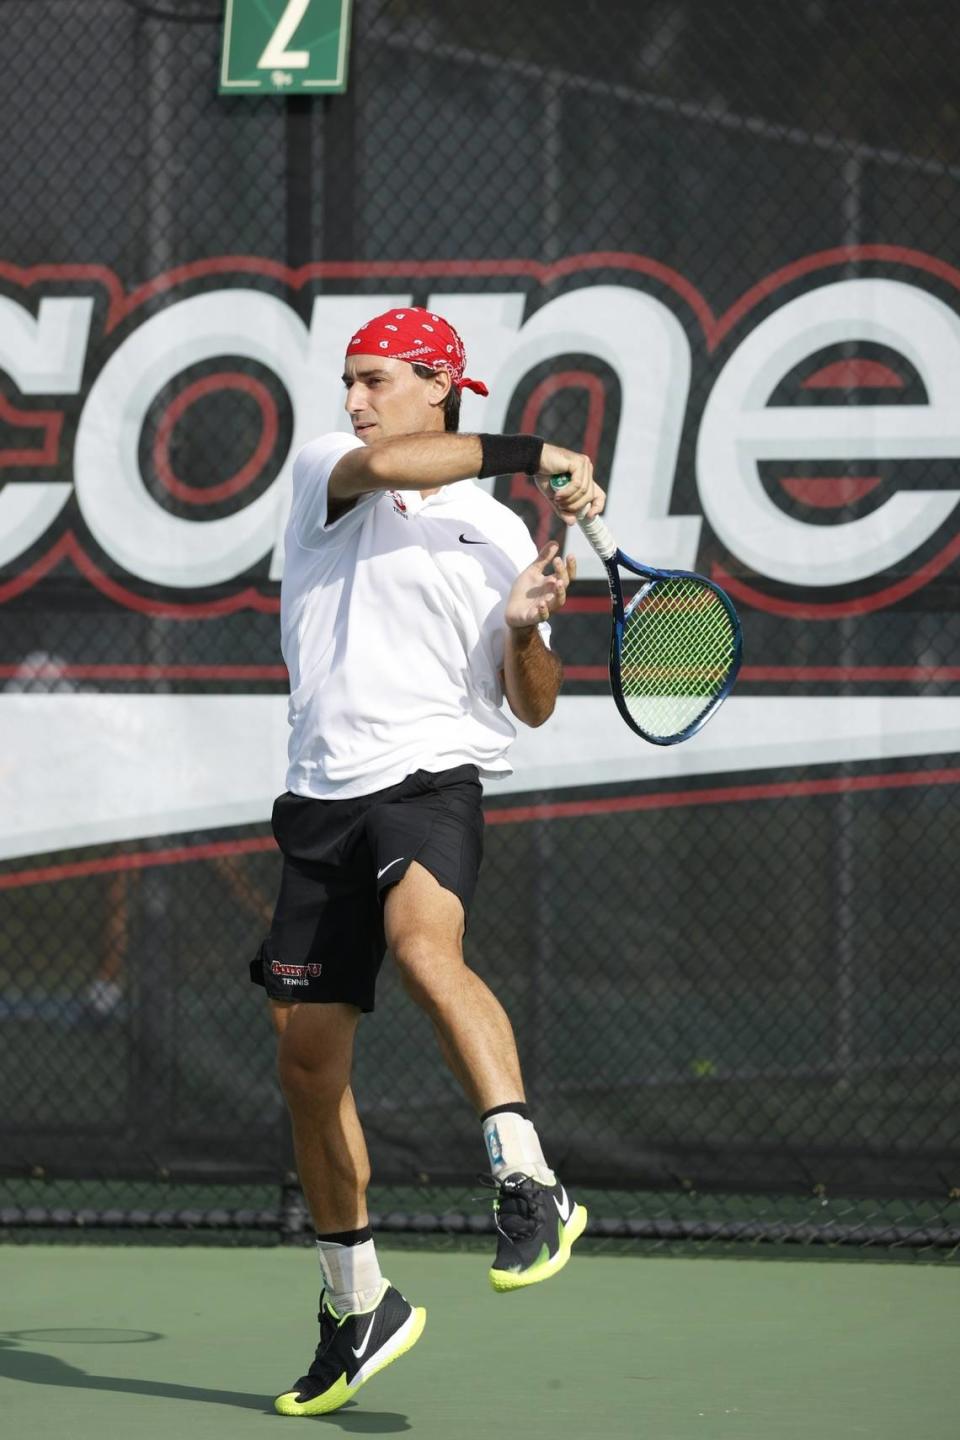 Alejandro Palacios, Barry University’s No. 2 singles player, scored a key win for the Bucs on their way to securing a national championship. Courtesy of Barry University